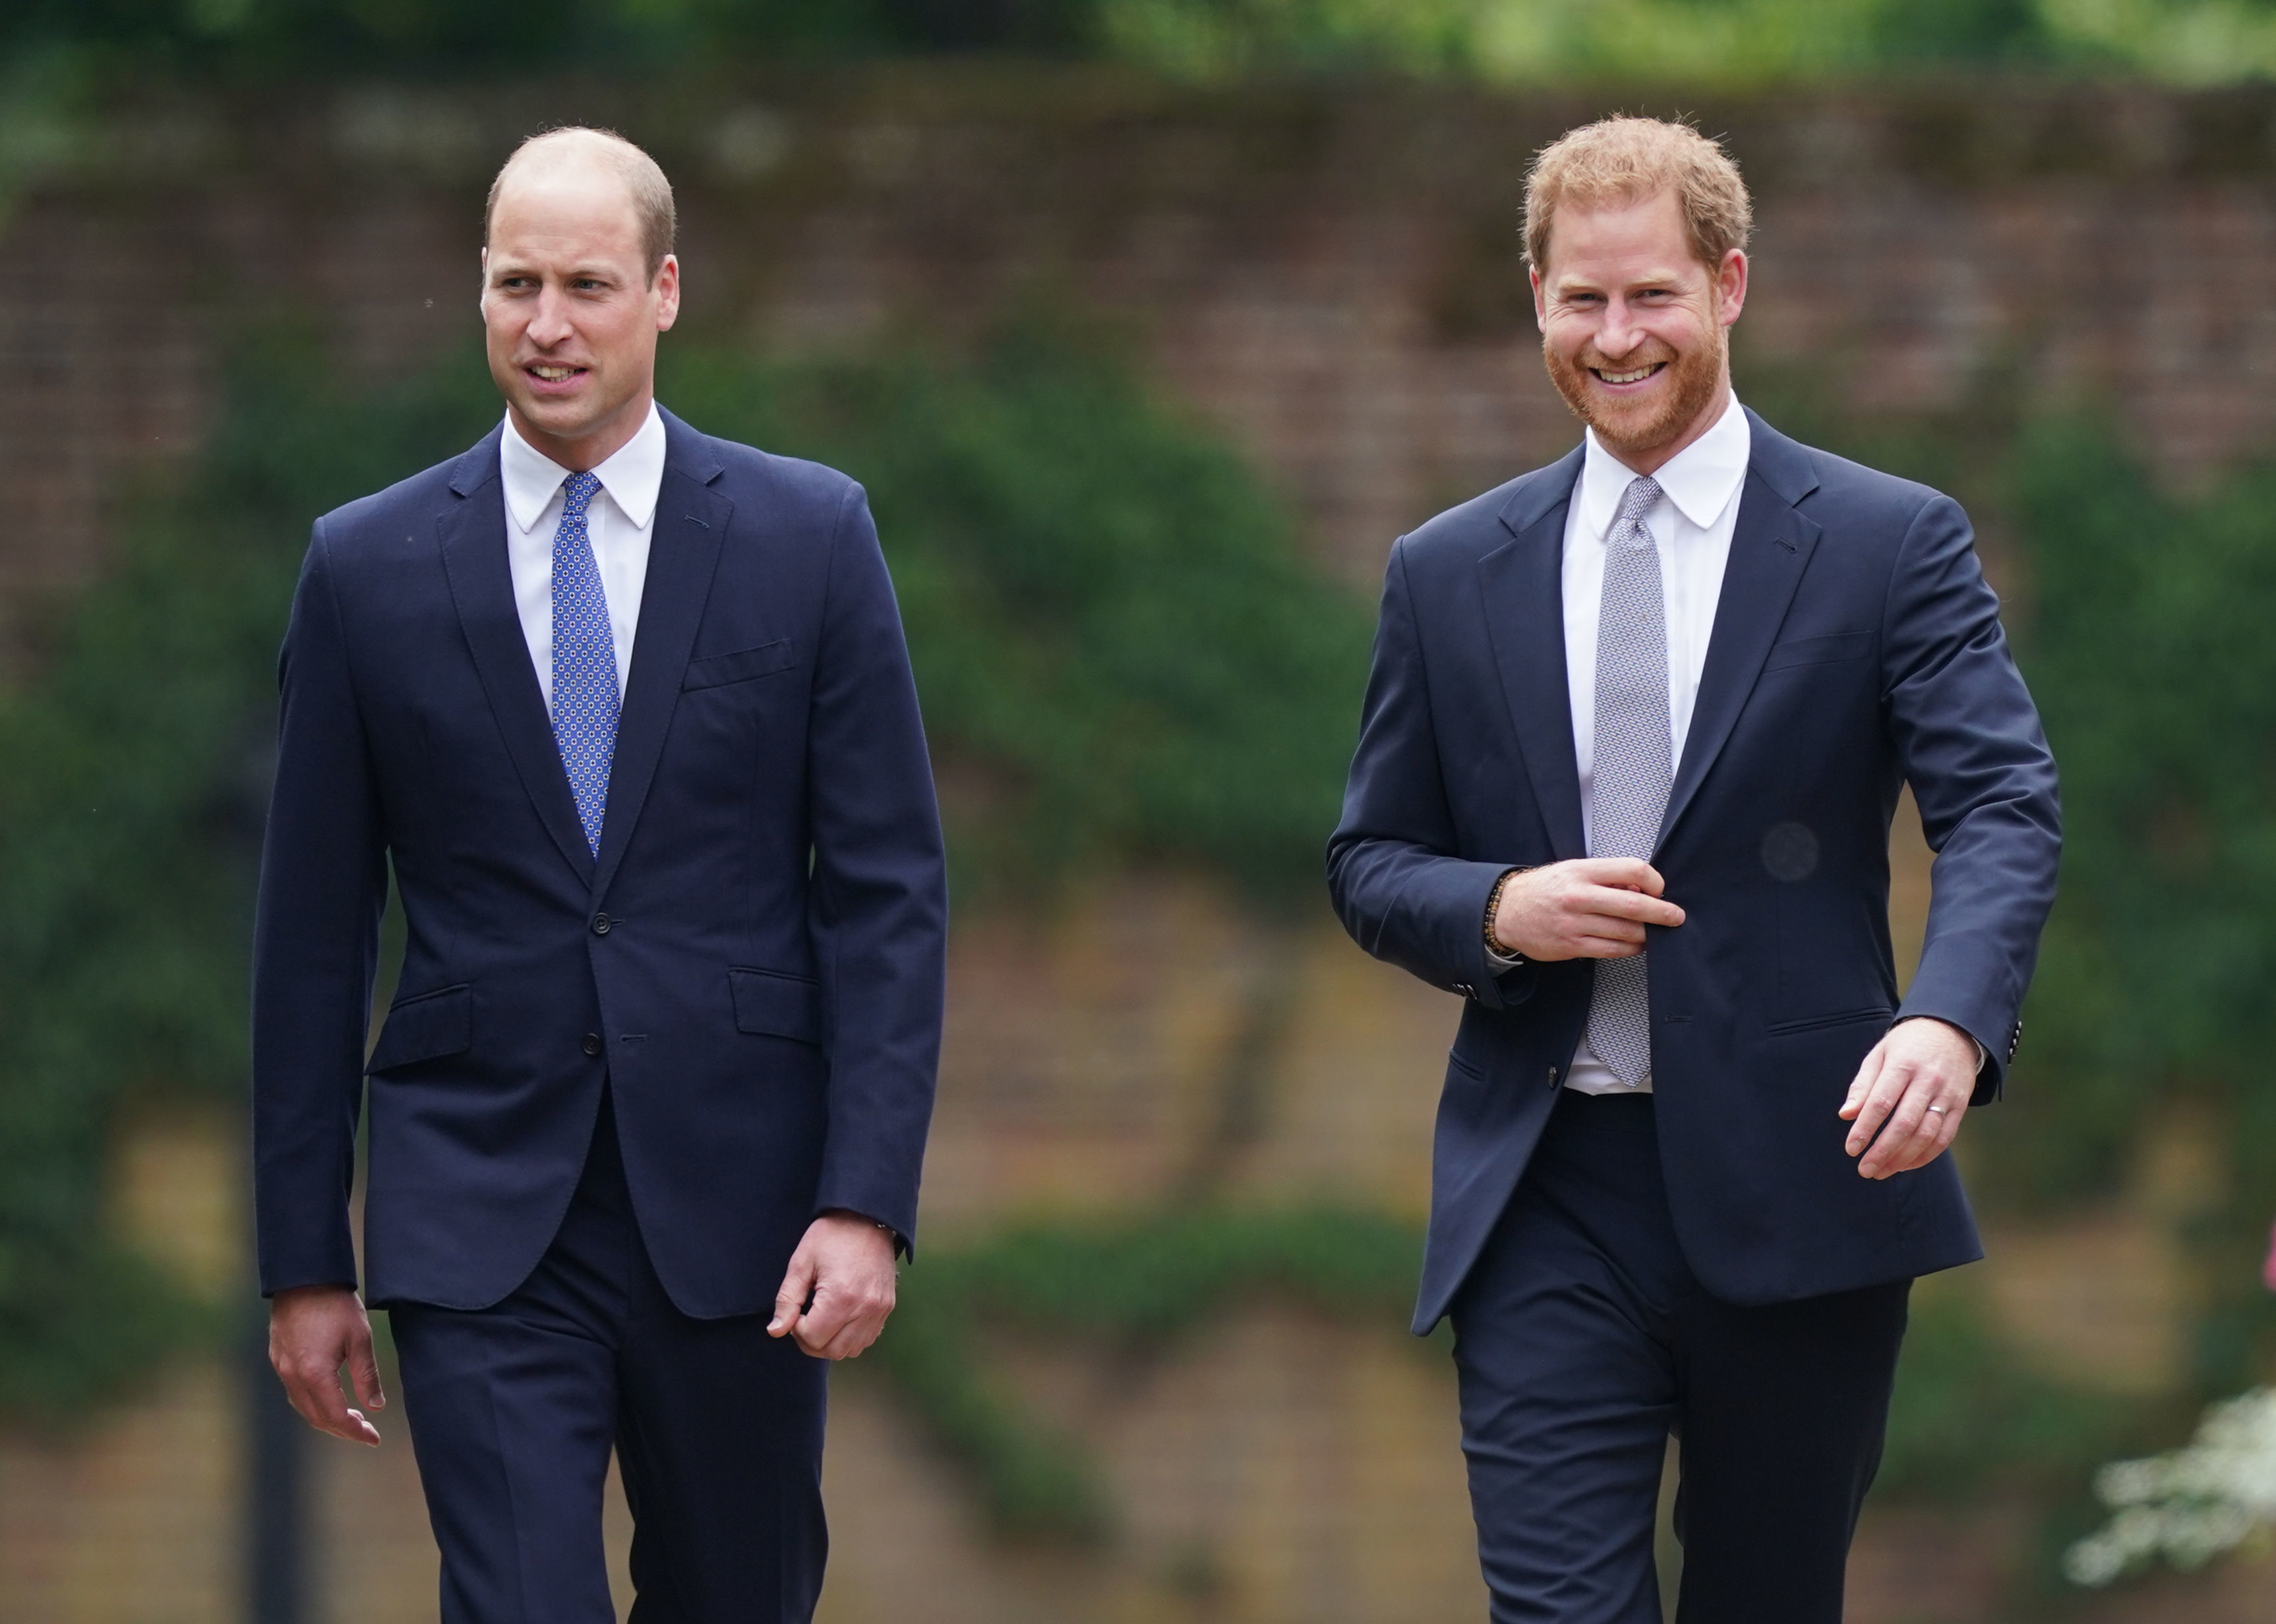 Prince William and Prince Harry arrive for the unveiling of a statue in the Sunken Garden at Kensington Palace on July 1, 2021 in London, England. | Source: Getty Images